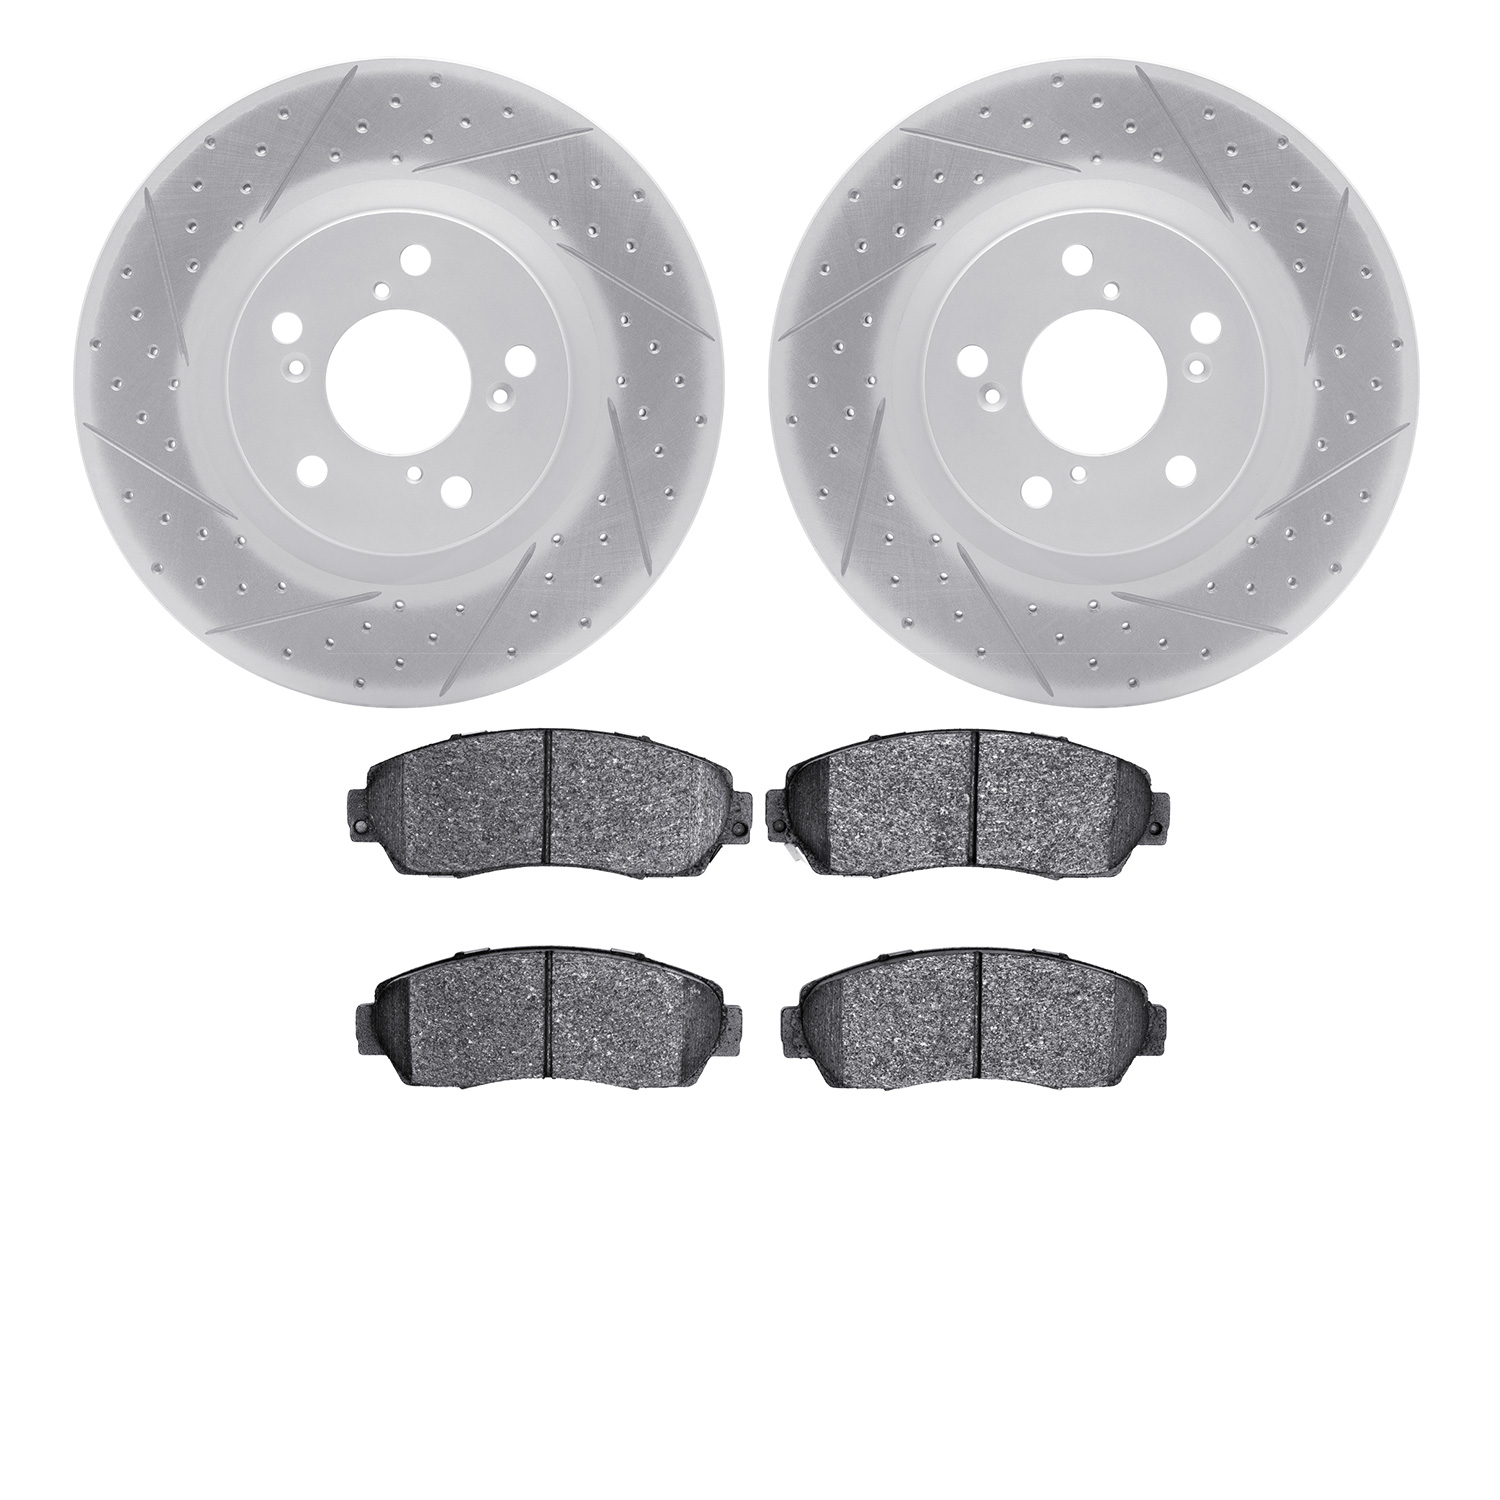 2502-59074 Geoperformance Drilled/Slotted Rotors w/5000 Advanced Brake Pads Kit, 2011-2014 Acura/Honda, Position: Front